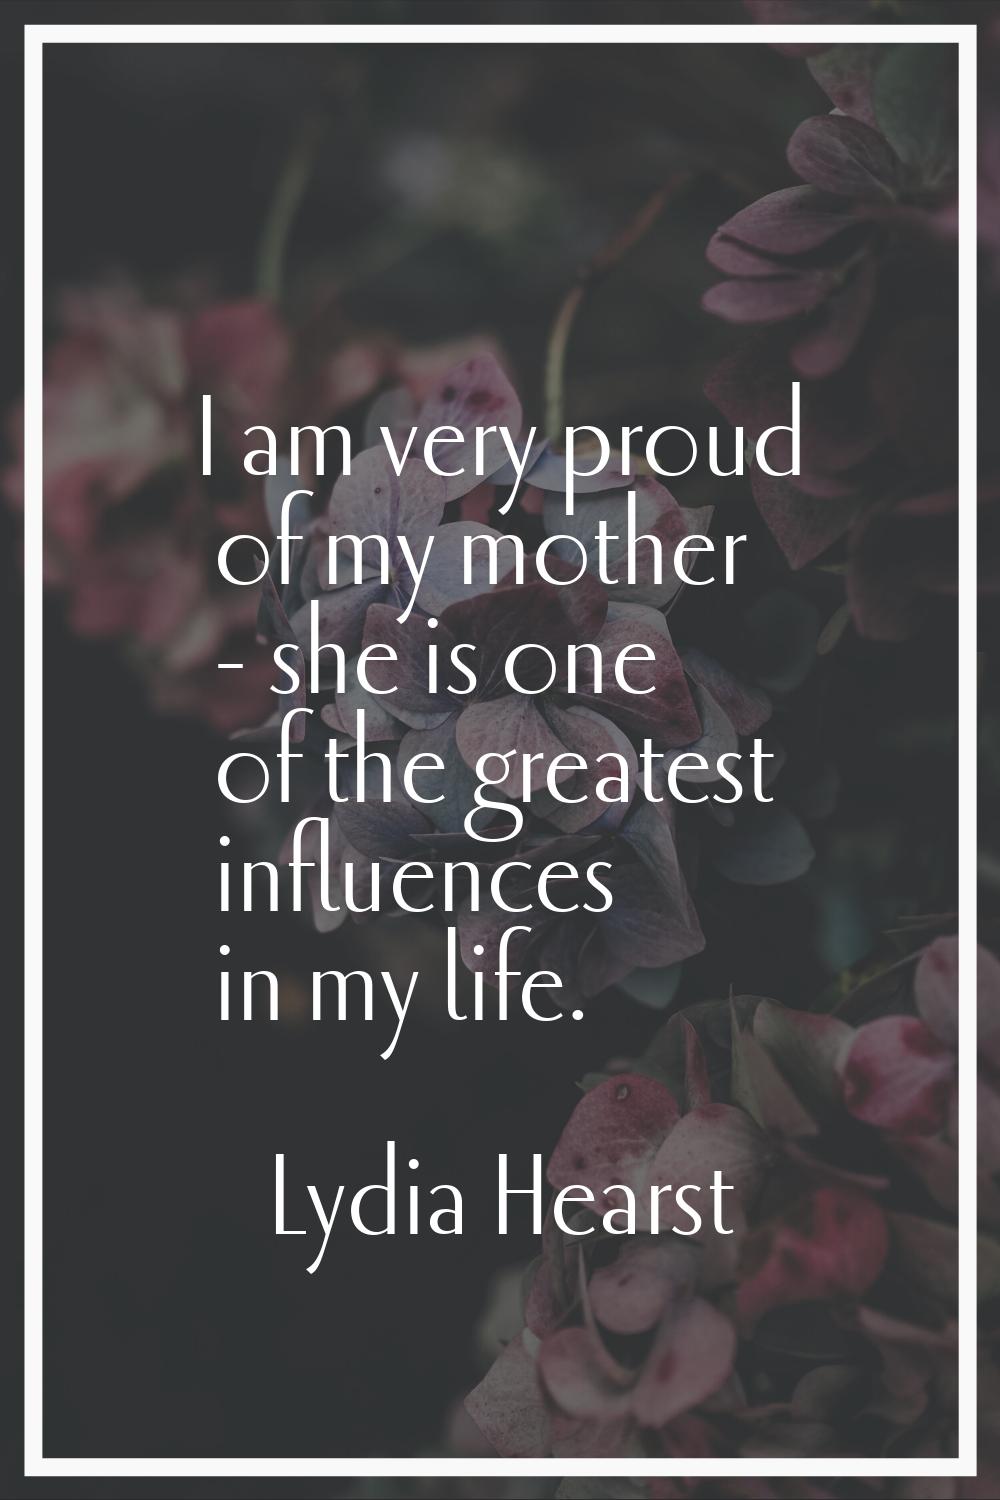 I am very proud of my mother - she is one of the greatest influences in my life.